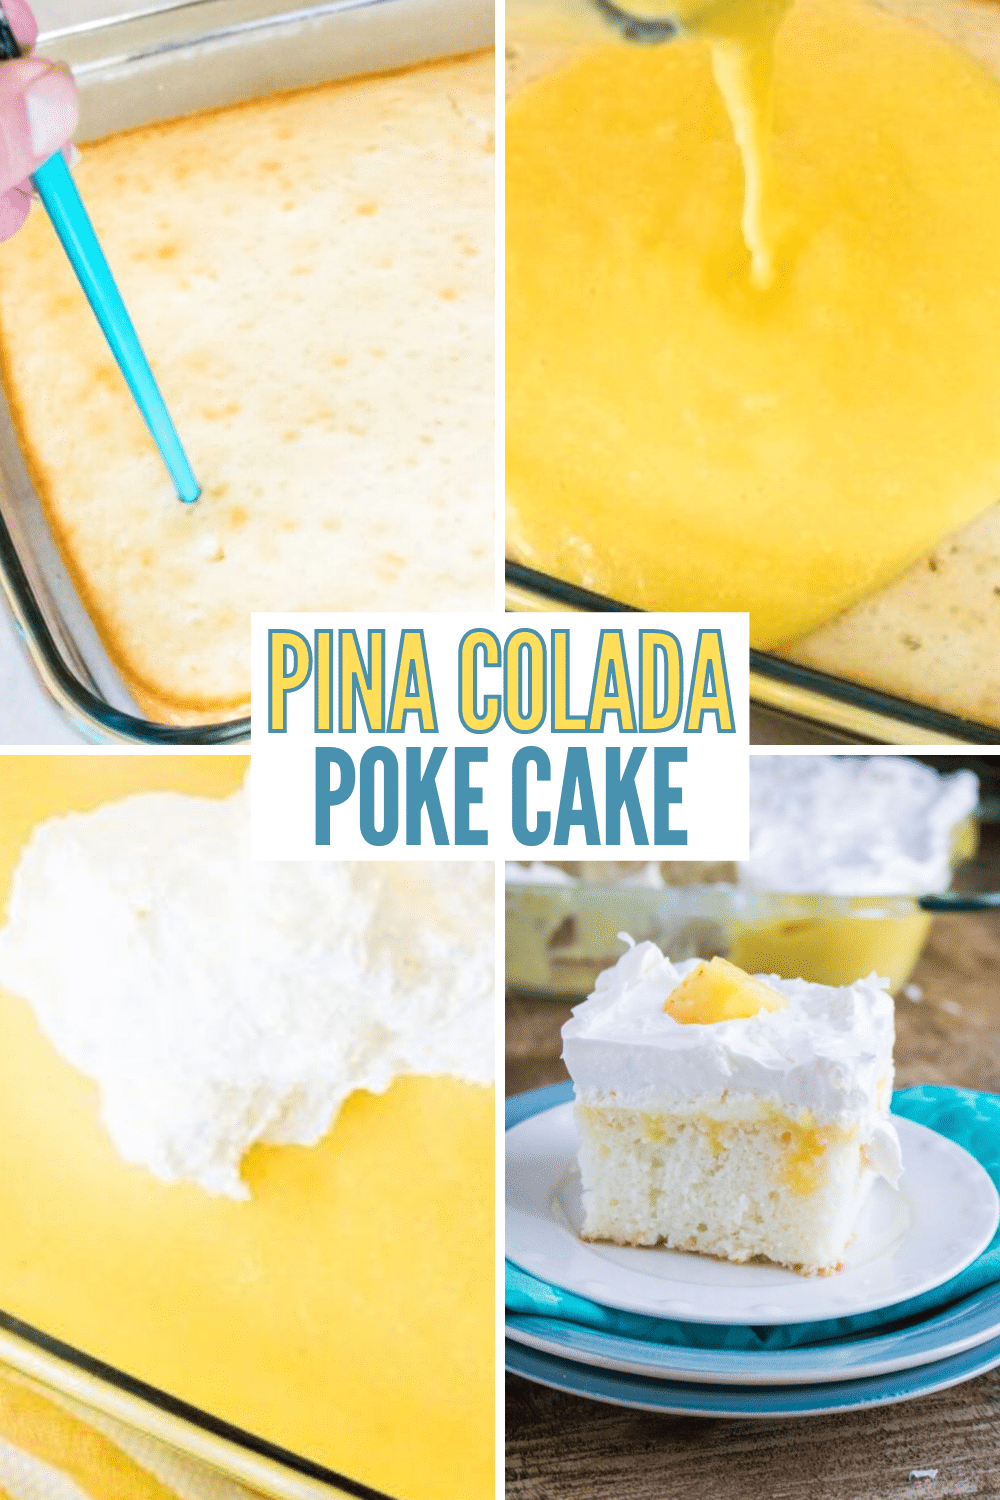 Get your lei ready as you turn your favorite tropical cocktail into a tasty tropical dessert. This homemade pina colada poke cake rocks! #pinacolada #pokecake #cake #dessert #recipe via @wondermomwannab